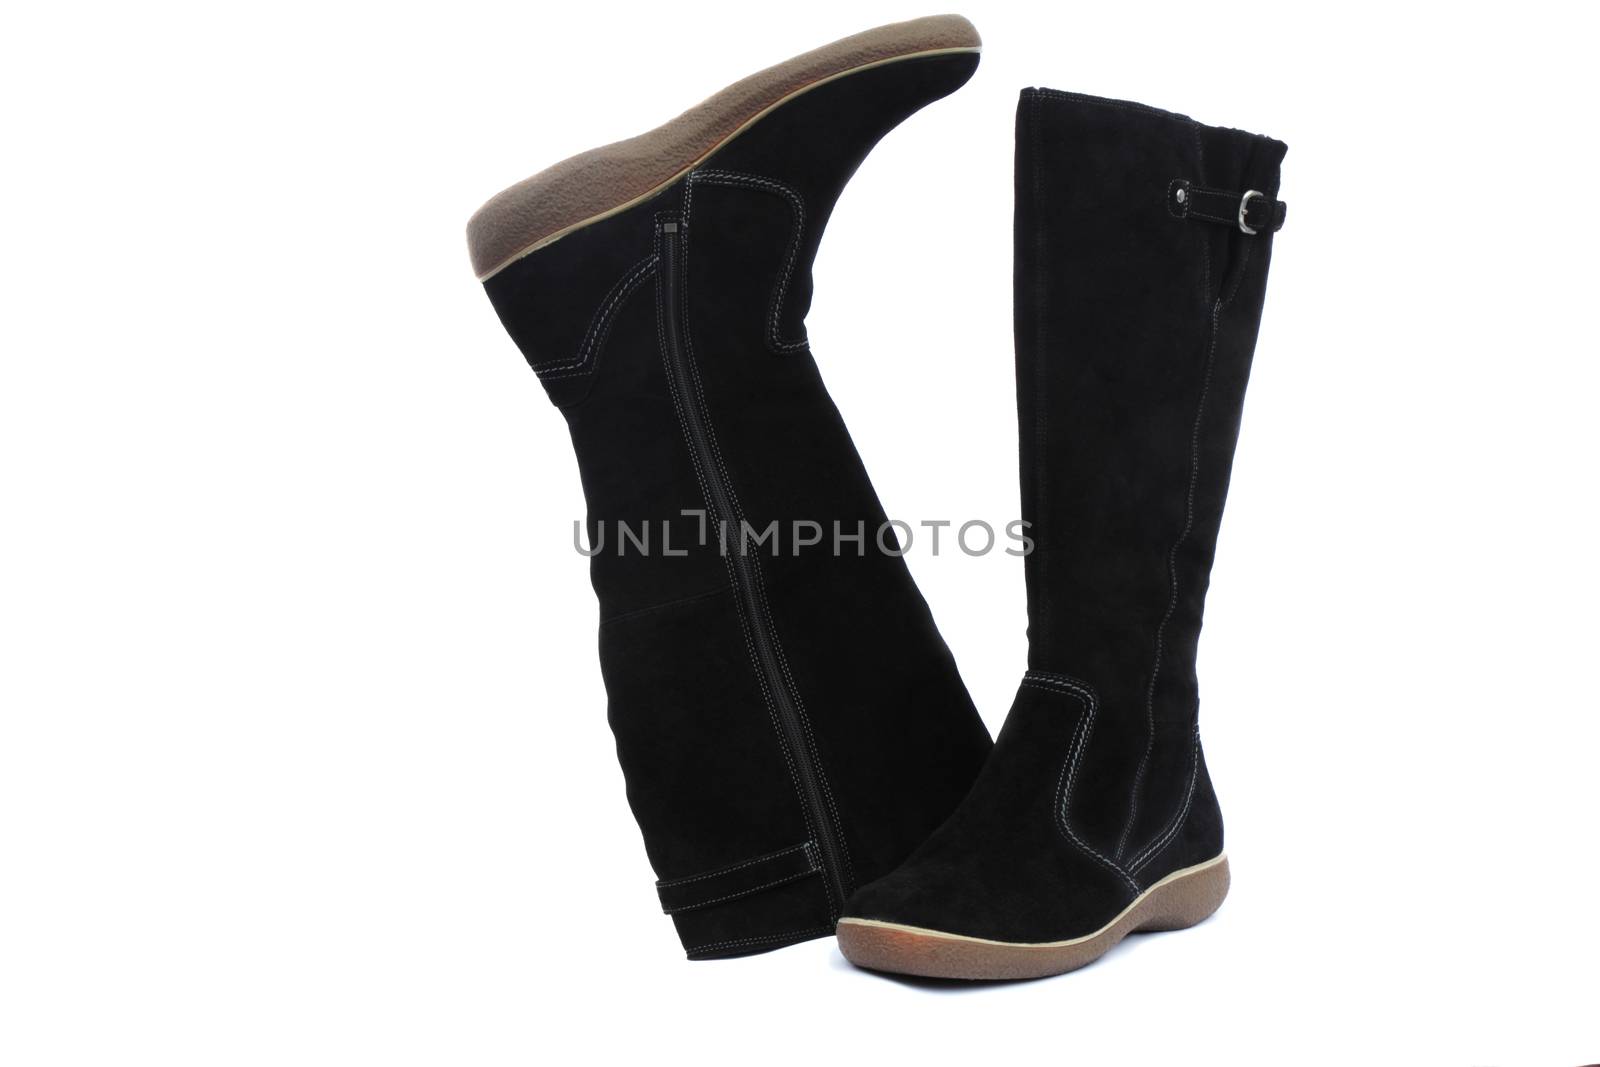 Comfortable winter suede boots black. Presented on a white background.
